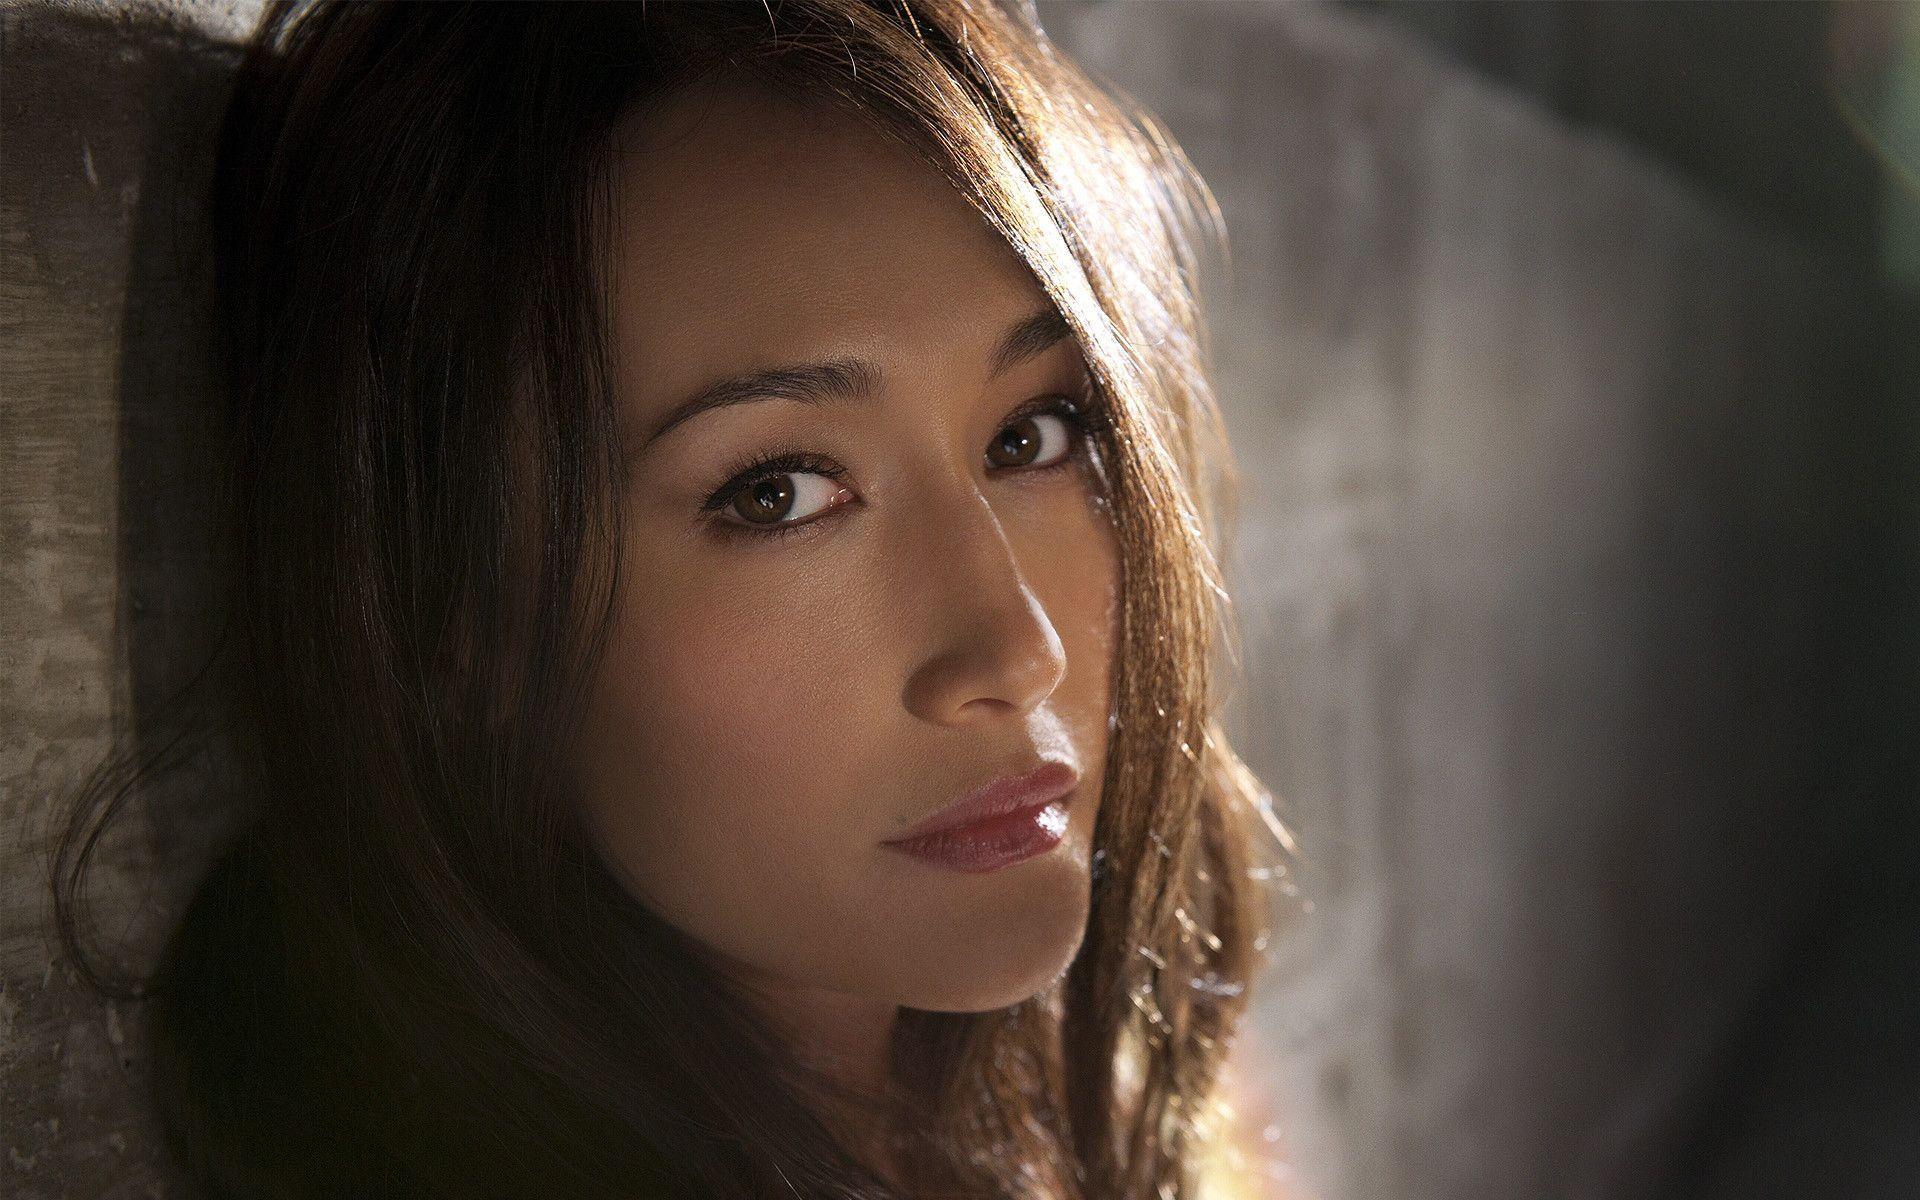 Free Download 2012 Maggie Q Wallpaper in 1920x1200 resolutions